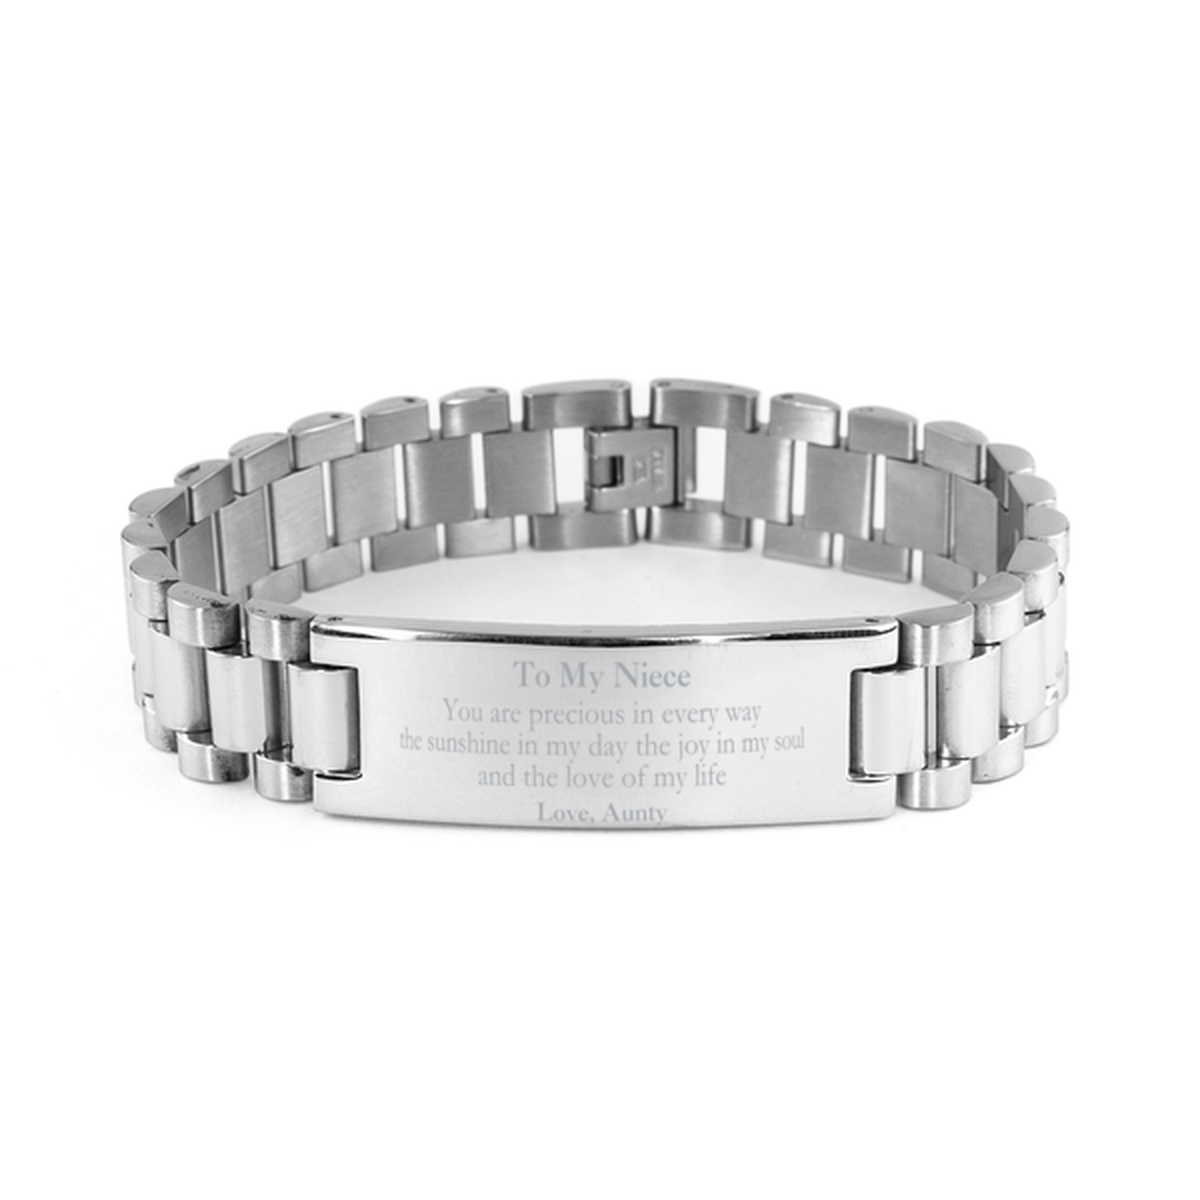 Graduation Gifts for Niece Ladder Stainless Steel Bracelet Present from Aunty, Christmas Niece Birthday Gifts Niece You are precious in every way the sunshine in my day. Love, Aunty